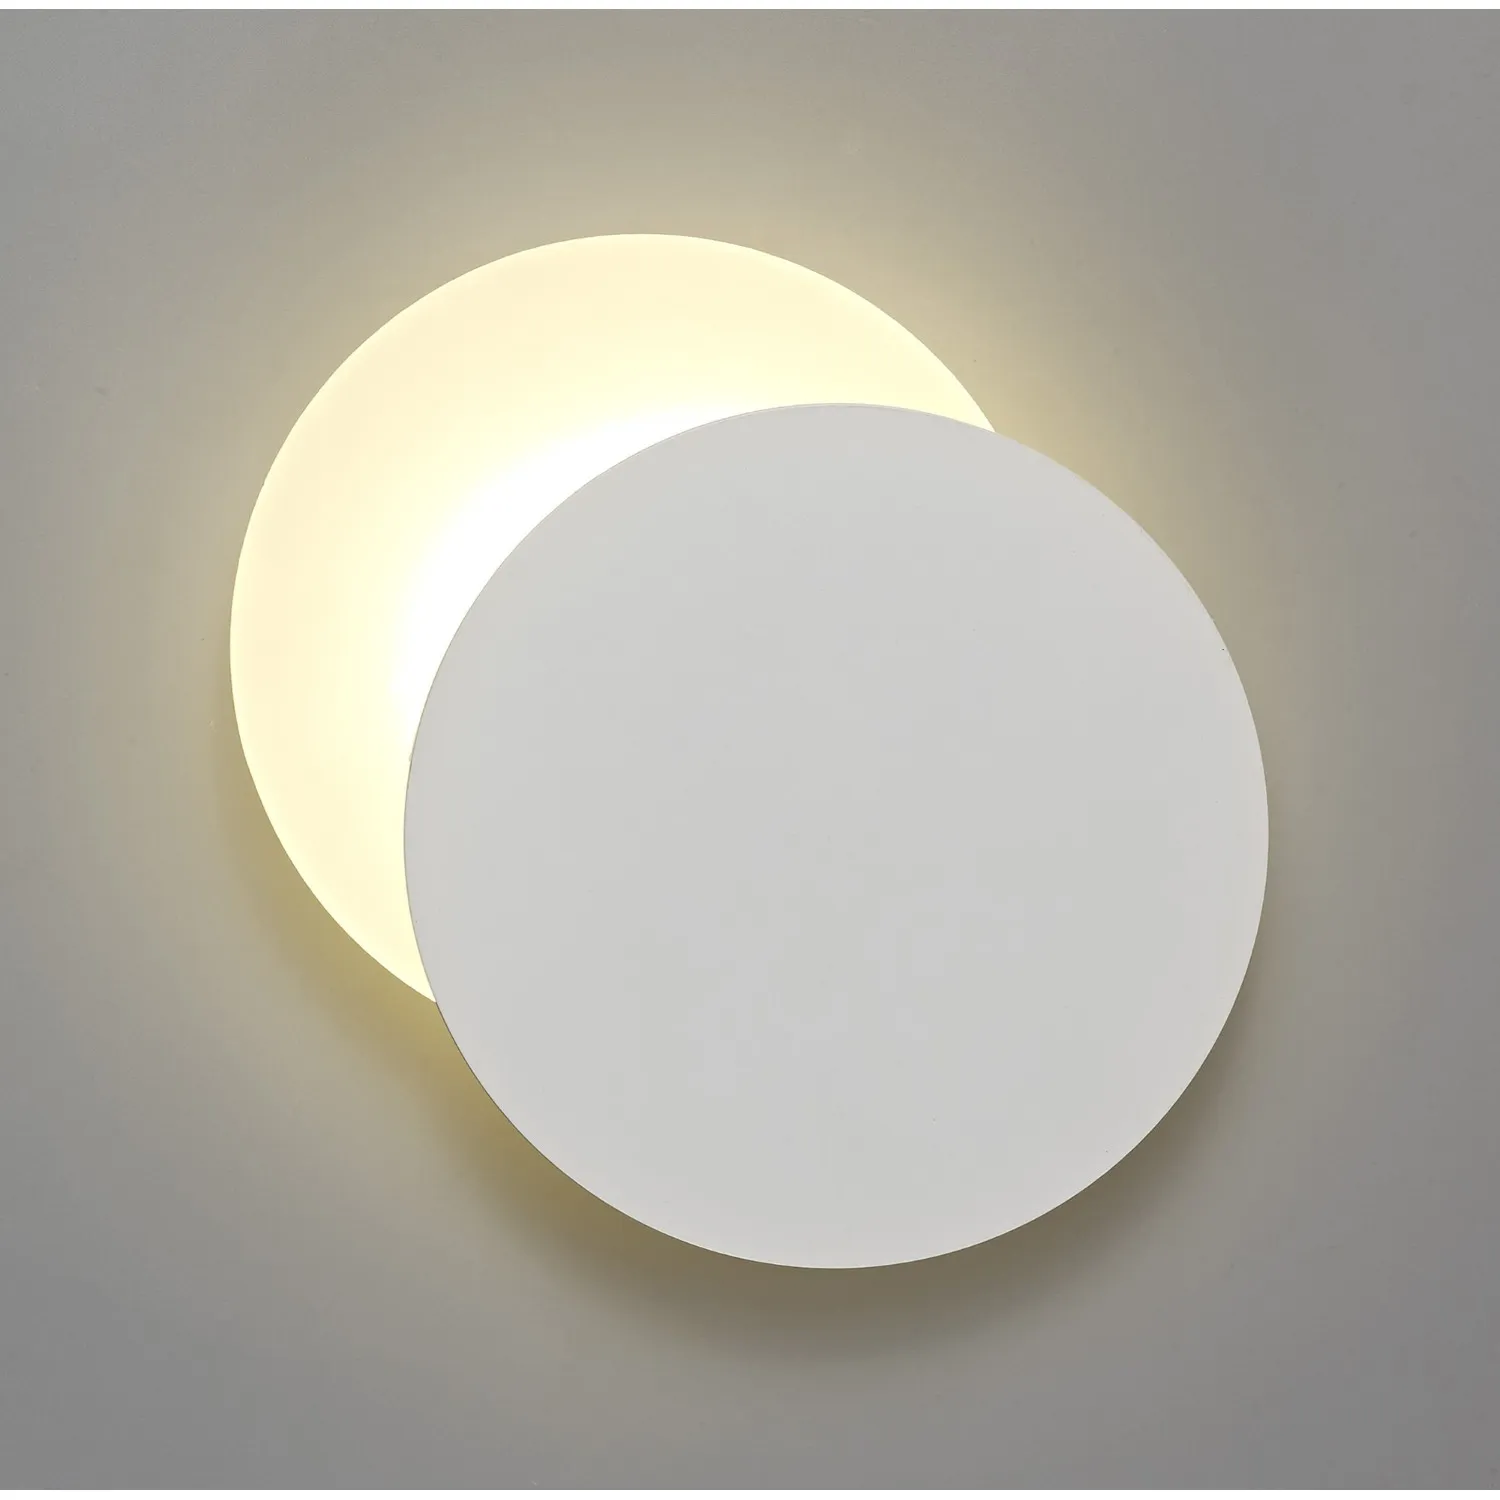 Edgware Magnetic Base Wall Lamp, 12W LED 3000K 498lm, 20 19cm Round Right Offset, Sand White Acrylic Frosted Diffuser